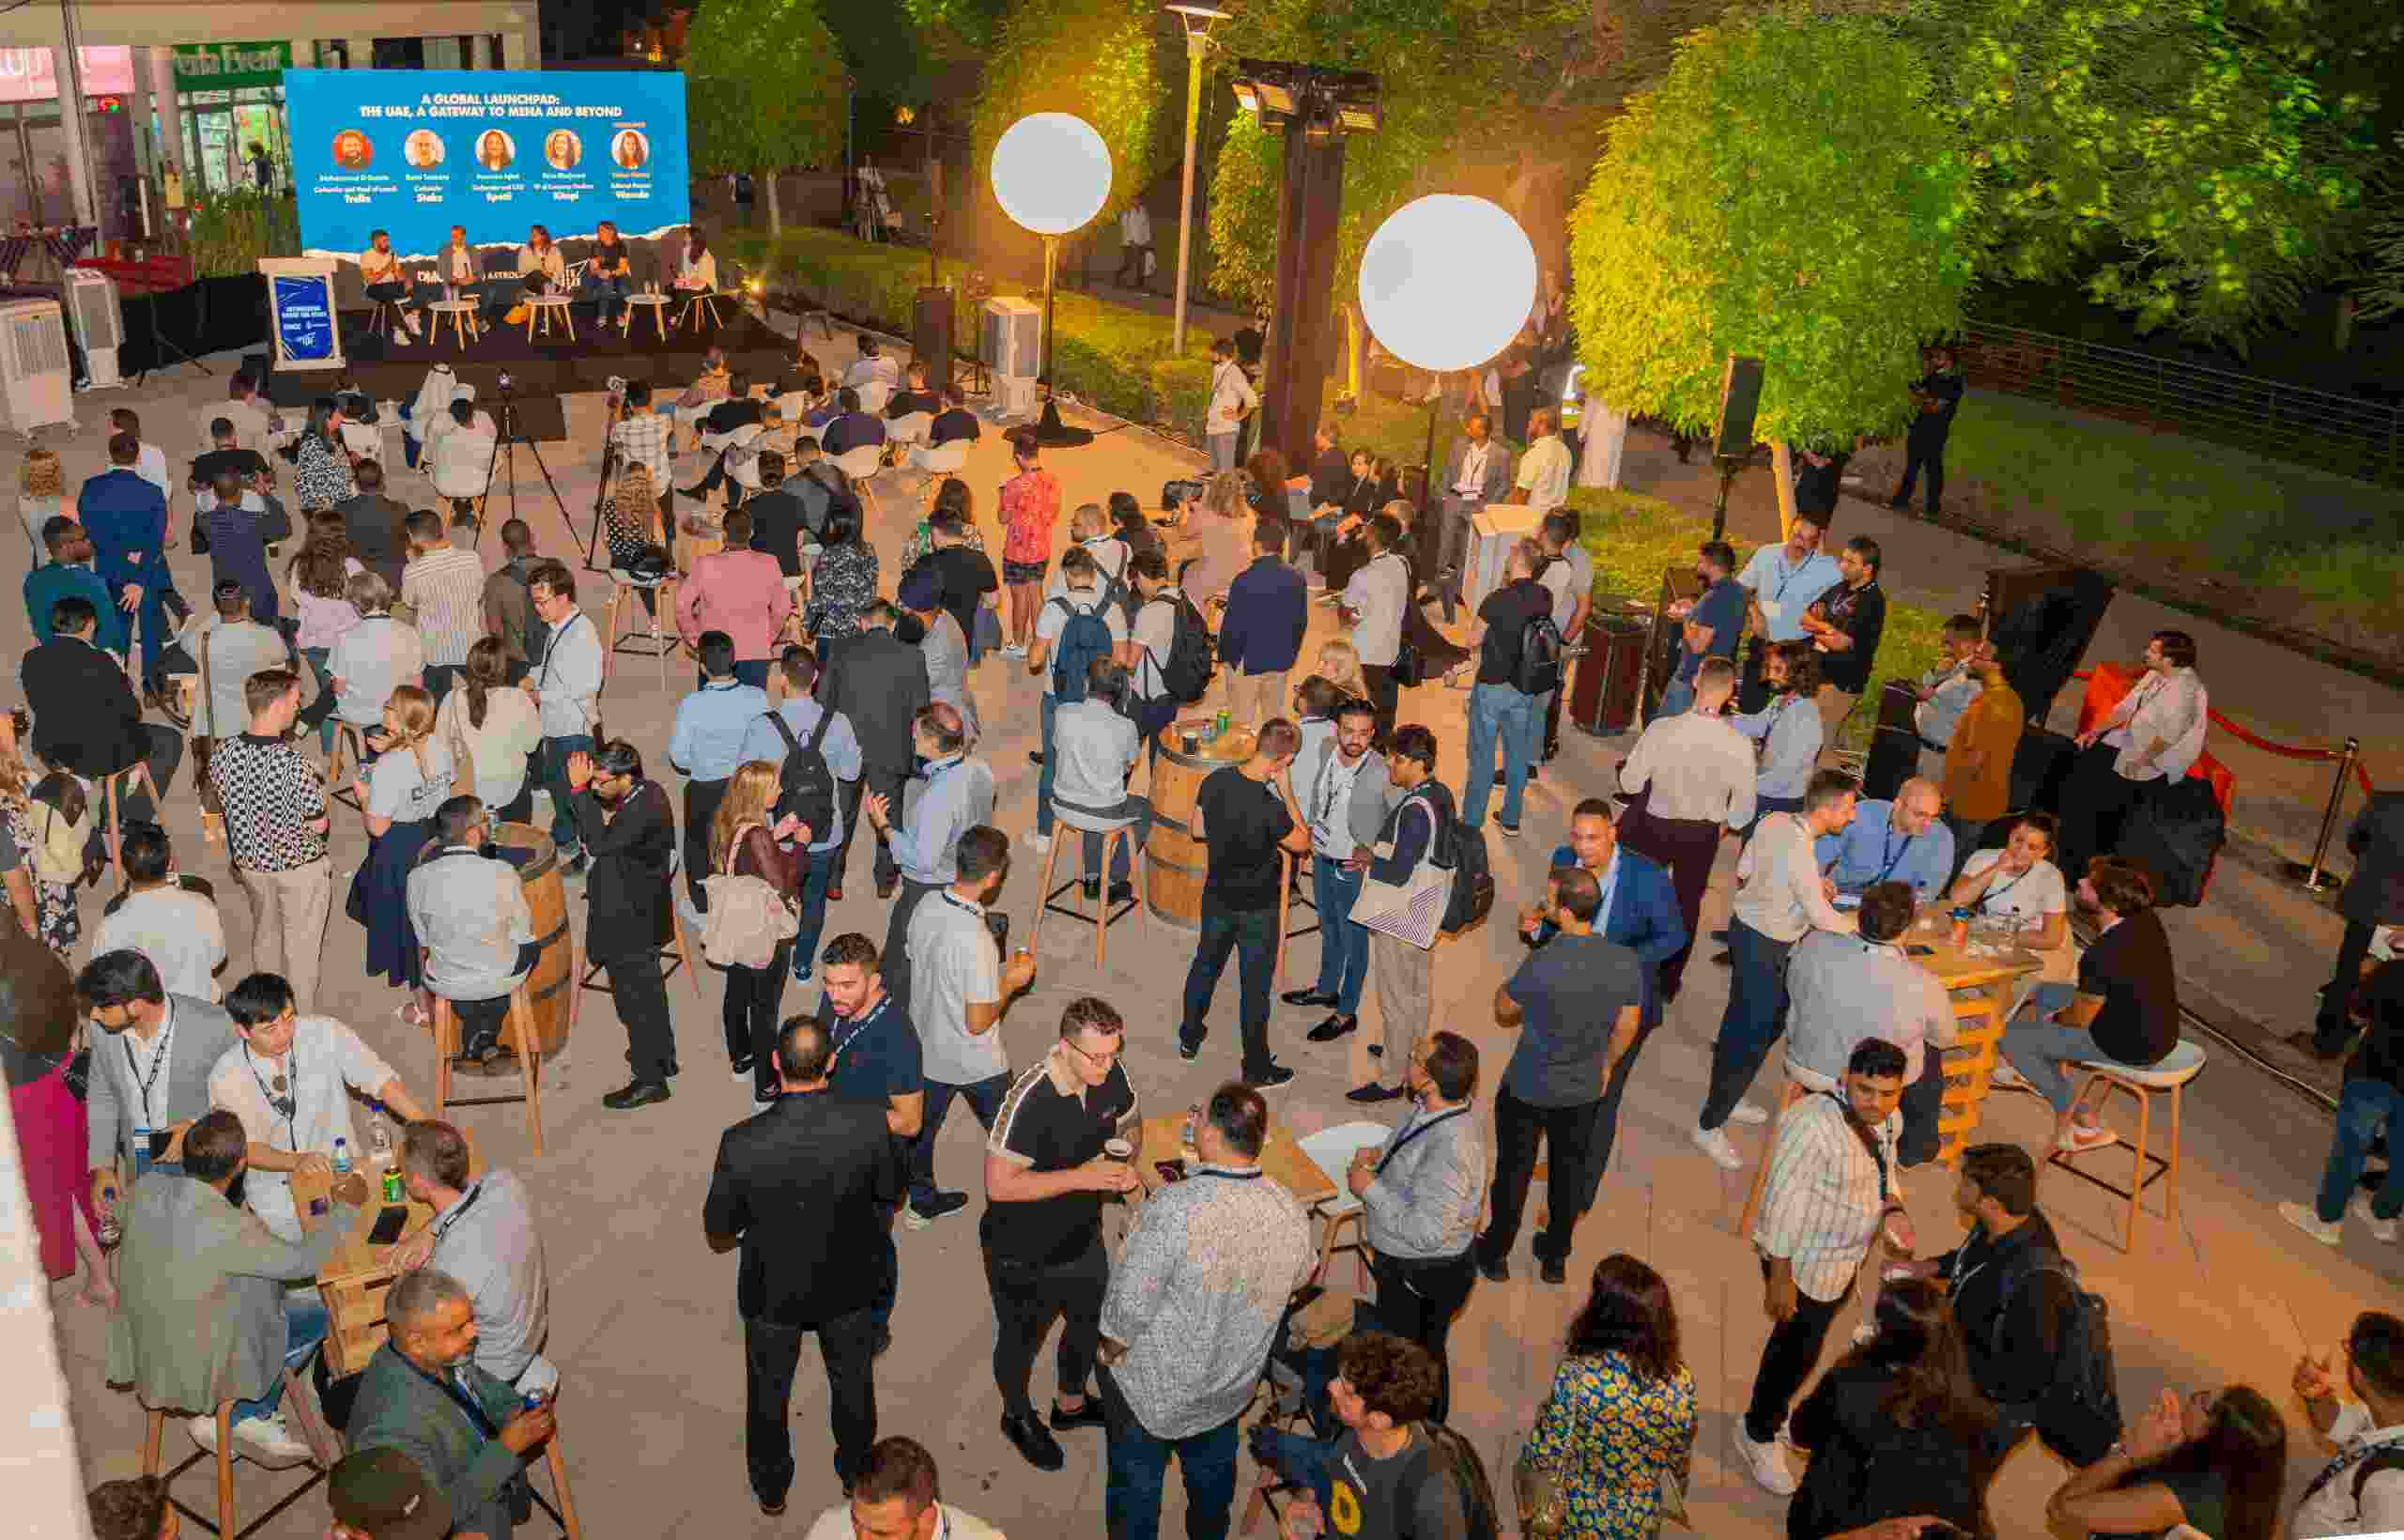 DMCC, AstroLabs, and North Star hosted 200+ entrepreneurs for “Networking Under the Stars”